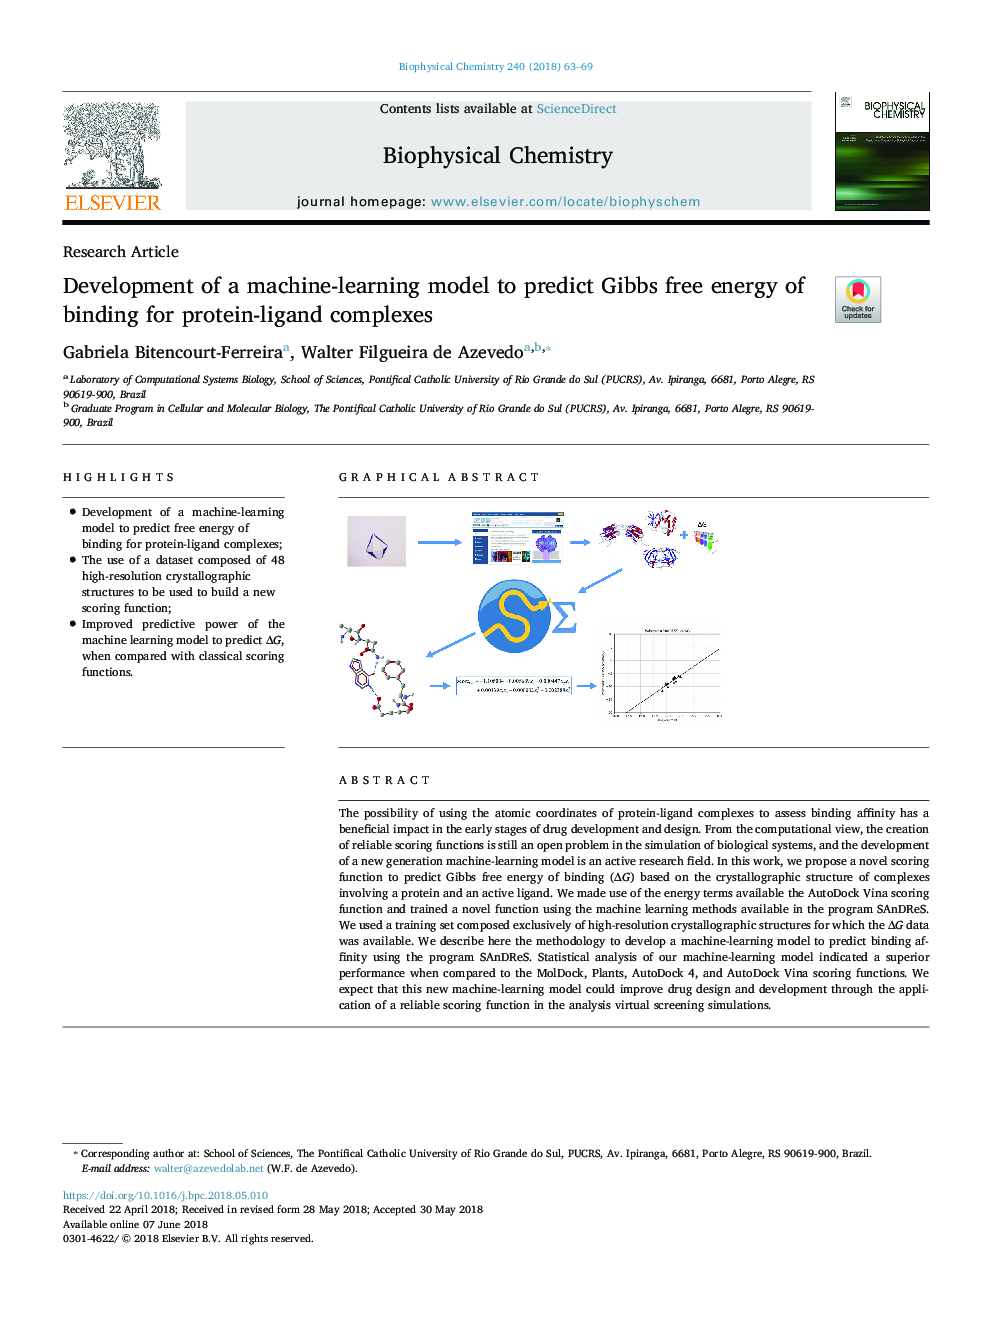 Development of a machine-learning model to predict Gibbs free energy of binding for protein-ligand complexes